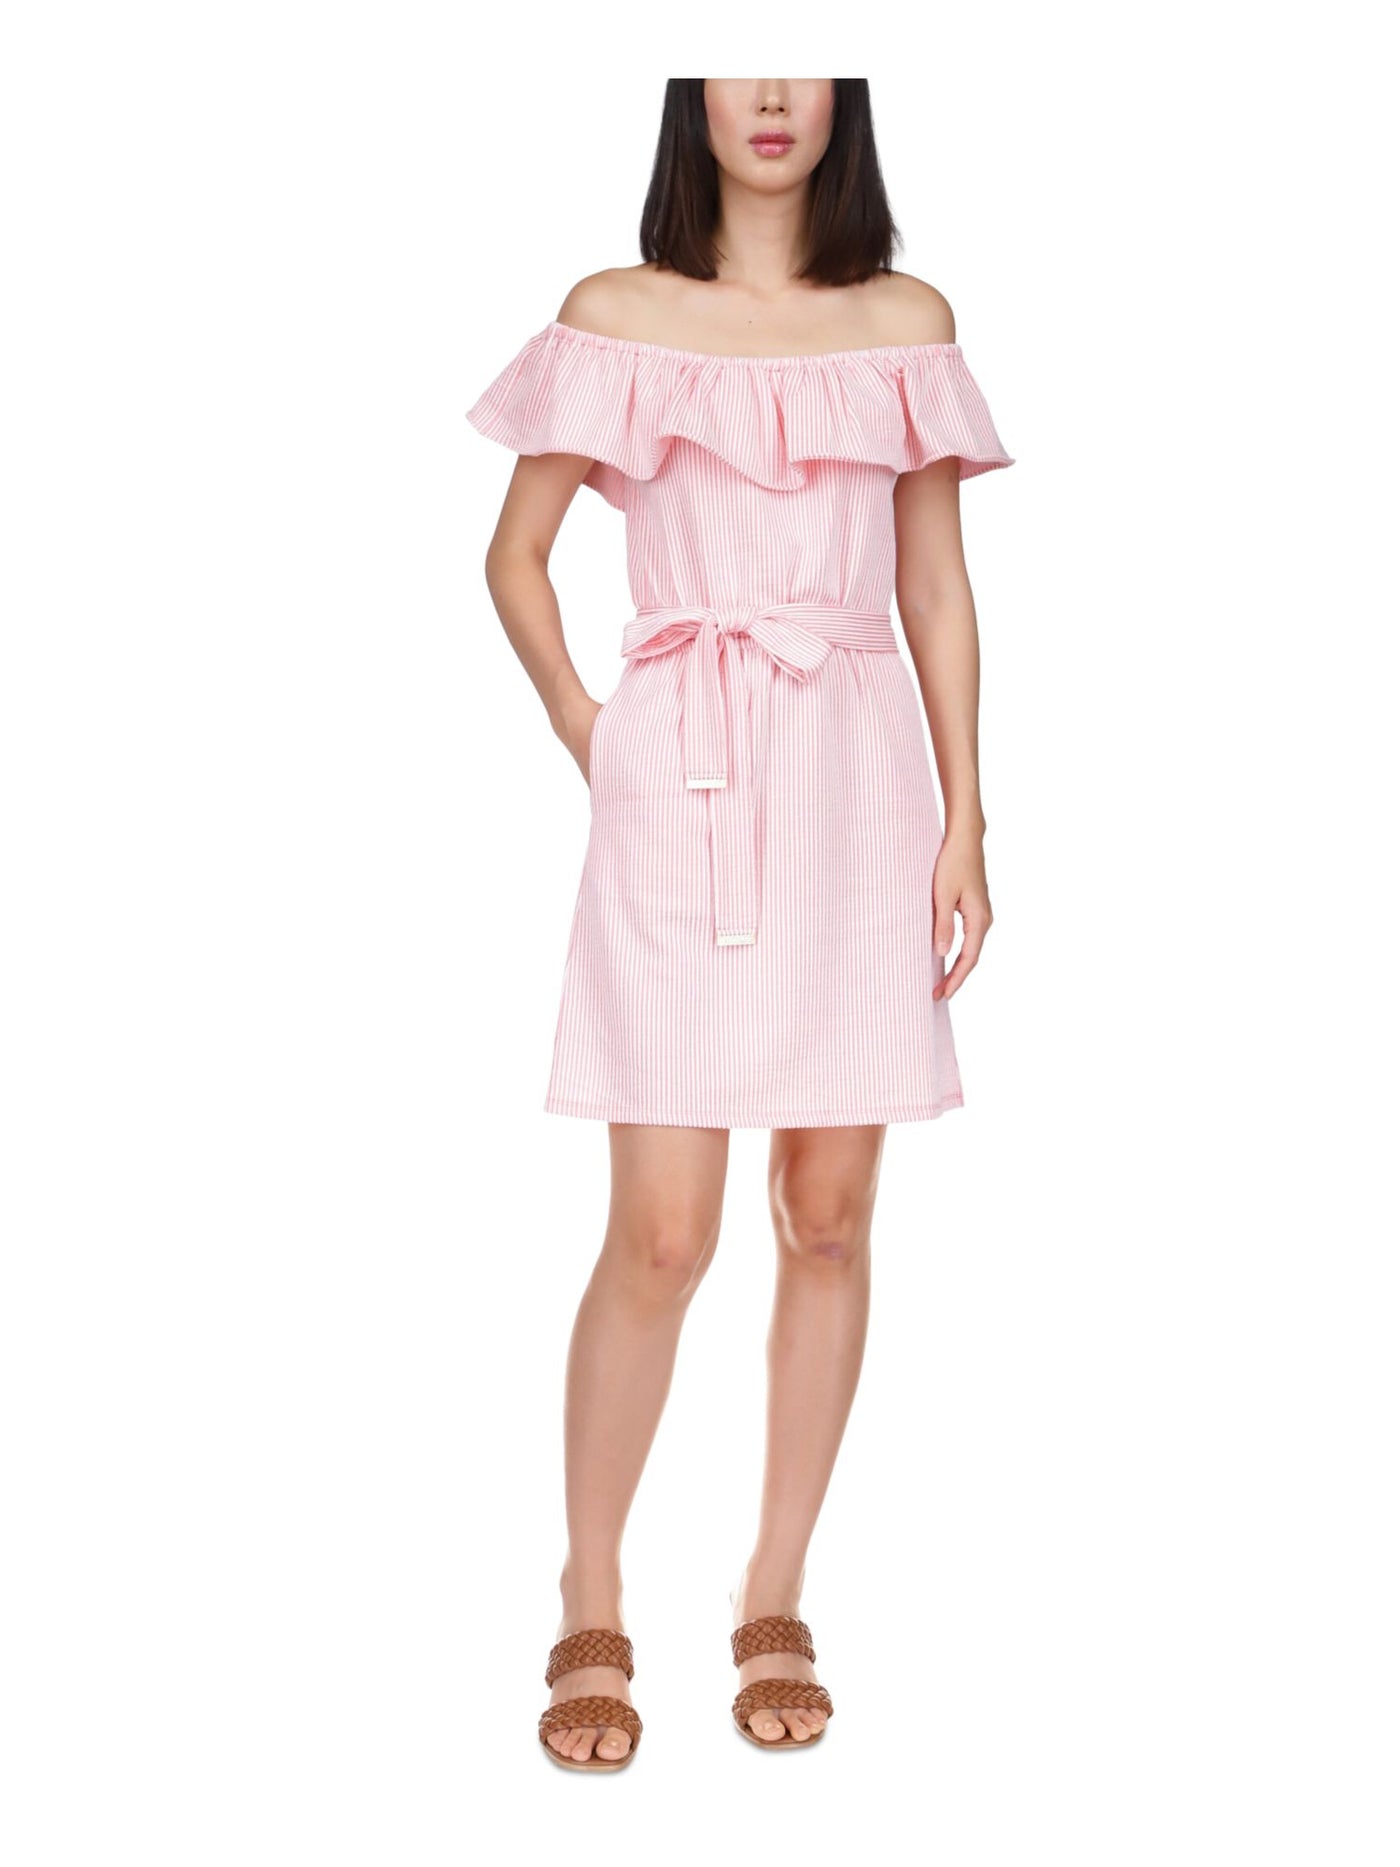 MICHAEL KORS Womens Pink Pocketed Textured Tie Waist Unlined Ruffled Striped Short Sleeve Off Shoulder Above The Knee Sheath Dress L